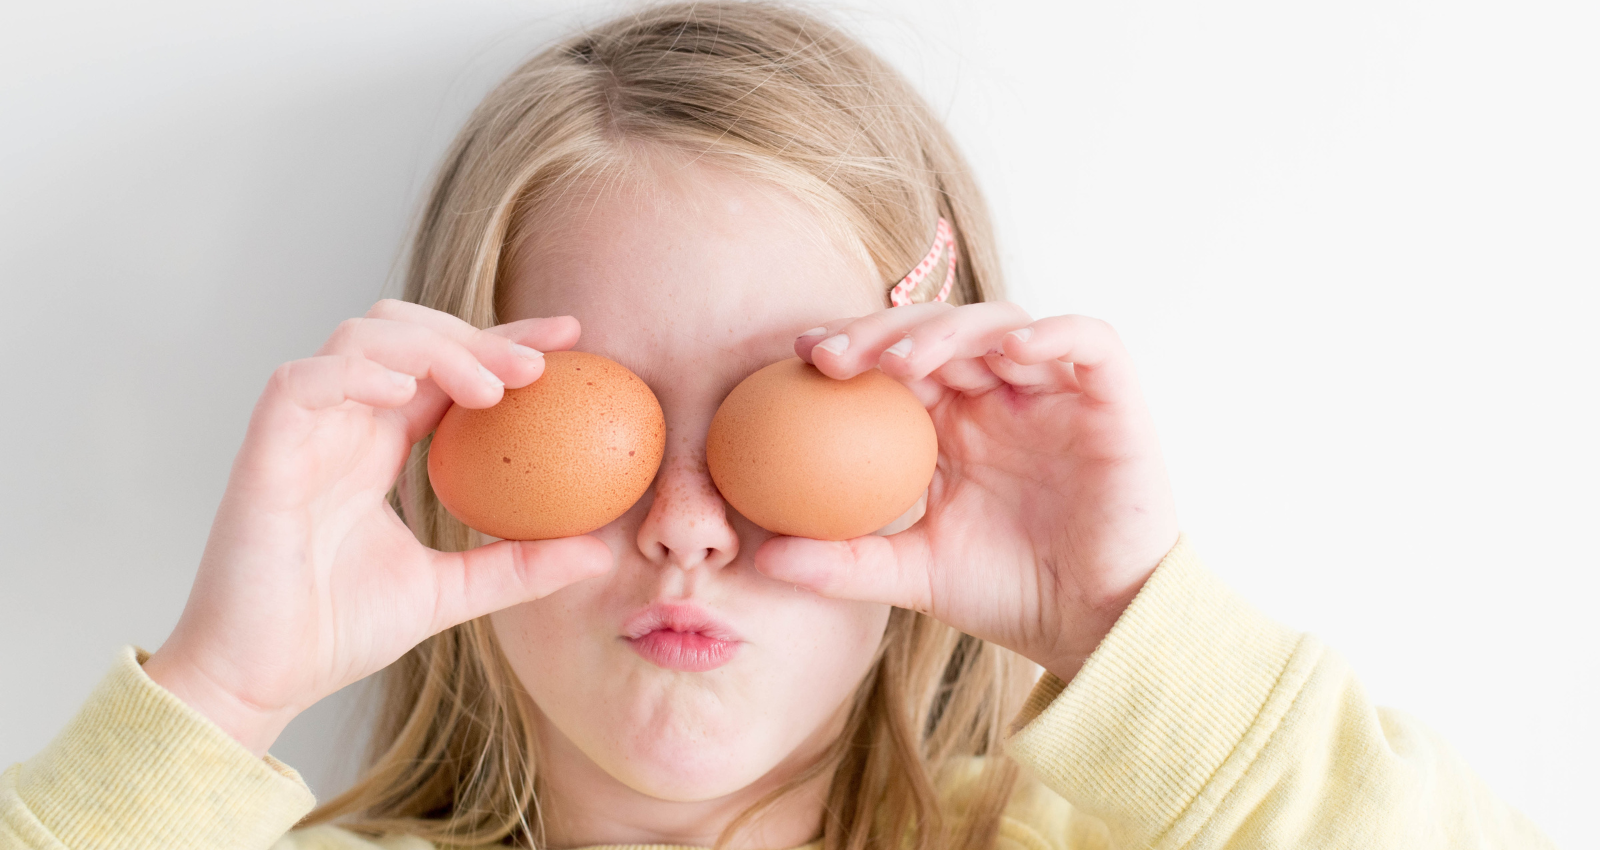 Young girl holding two eggs up in front of her face in a playful gesture